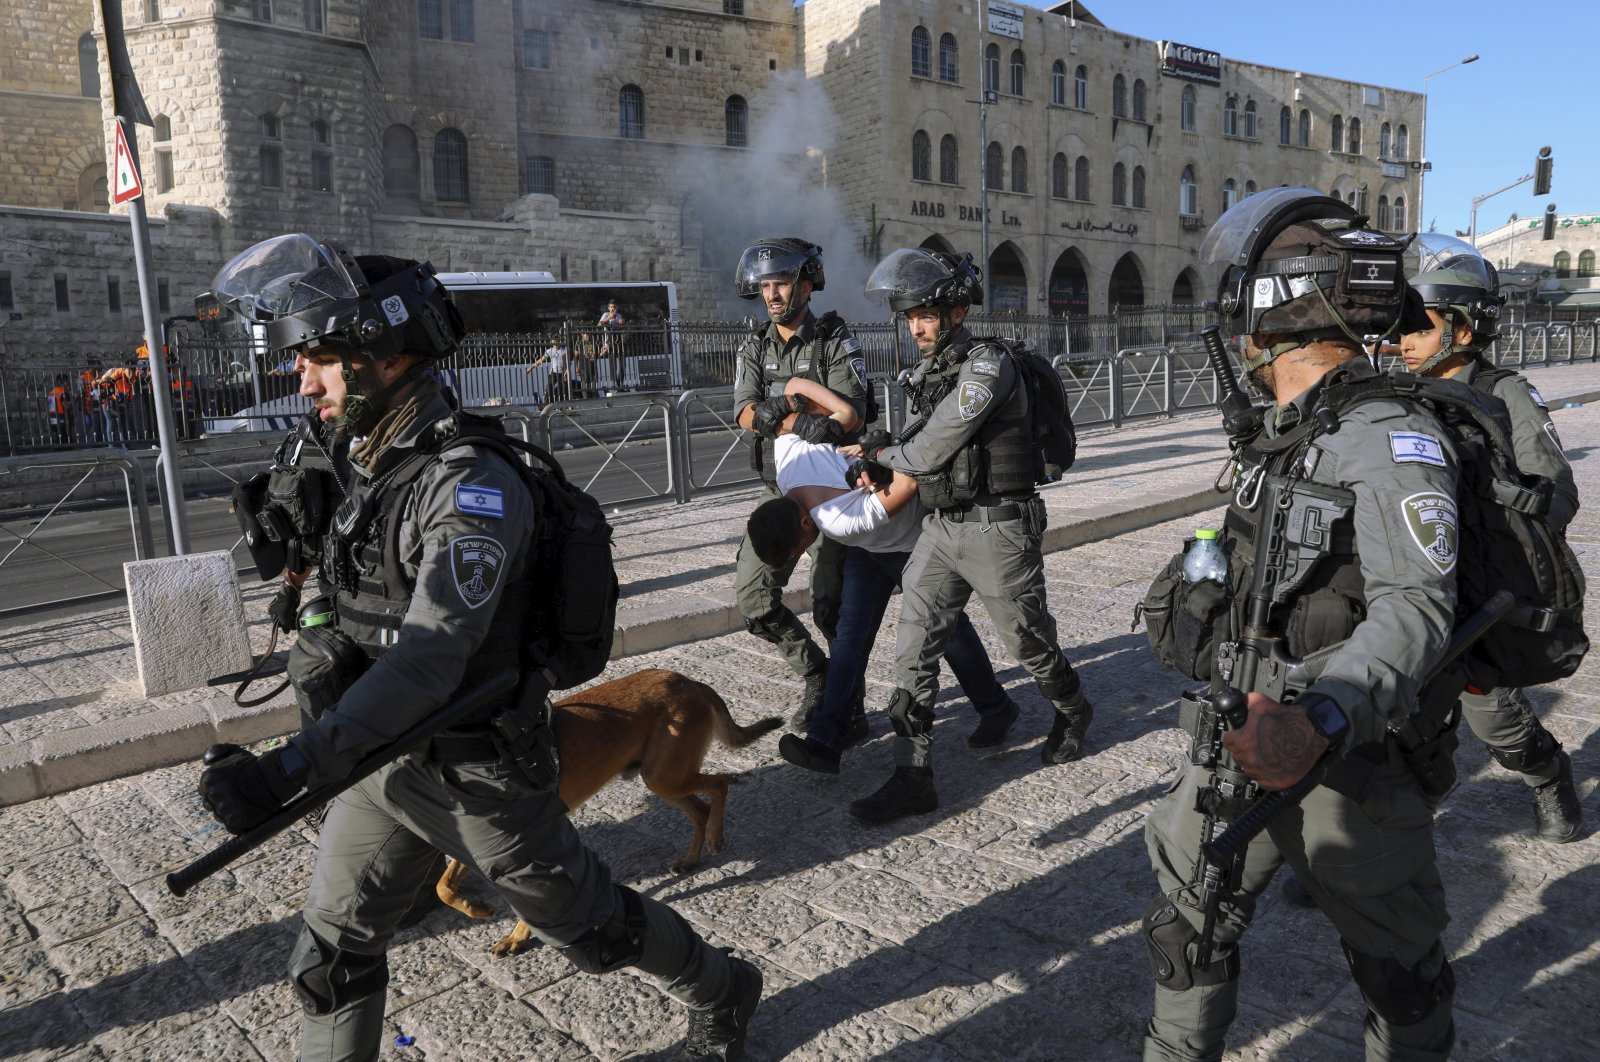 Israeli border police officers detain a Palestinian youth during clashes between Palestinians and Israeli police as thousands of Muslims flocked to Jerusalem's Old City to celebrate the Prophet Muhammad's birthday, East Jerusalem, occupied Palestine, Oct. 19, 2021. (AP Photo)